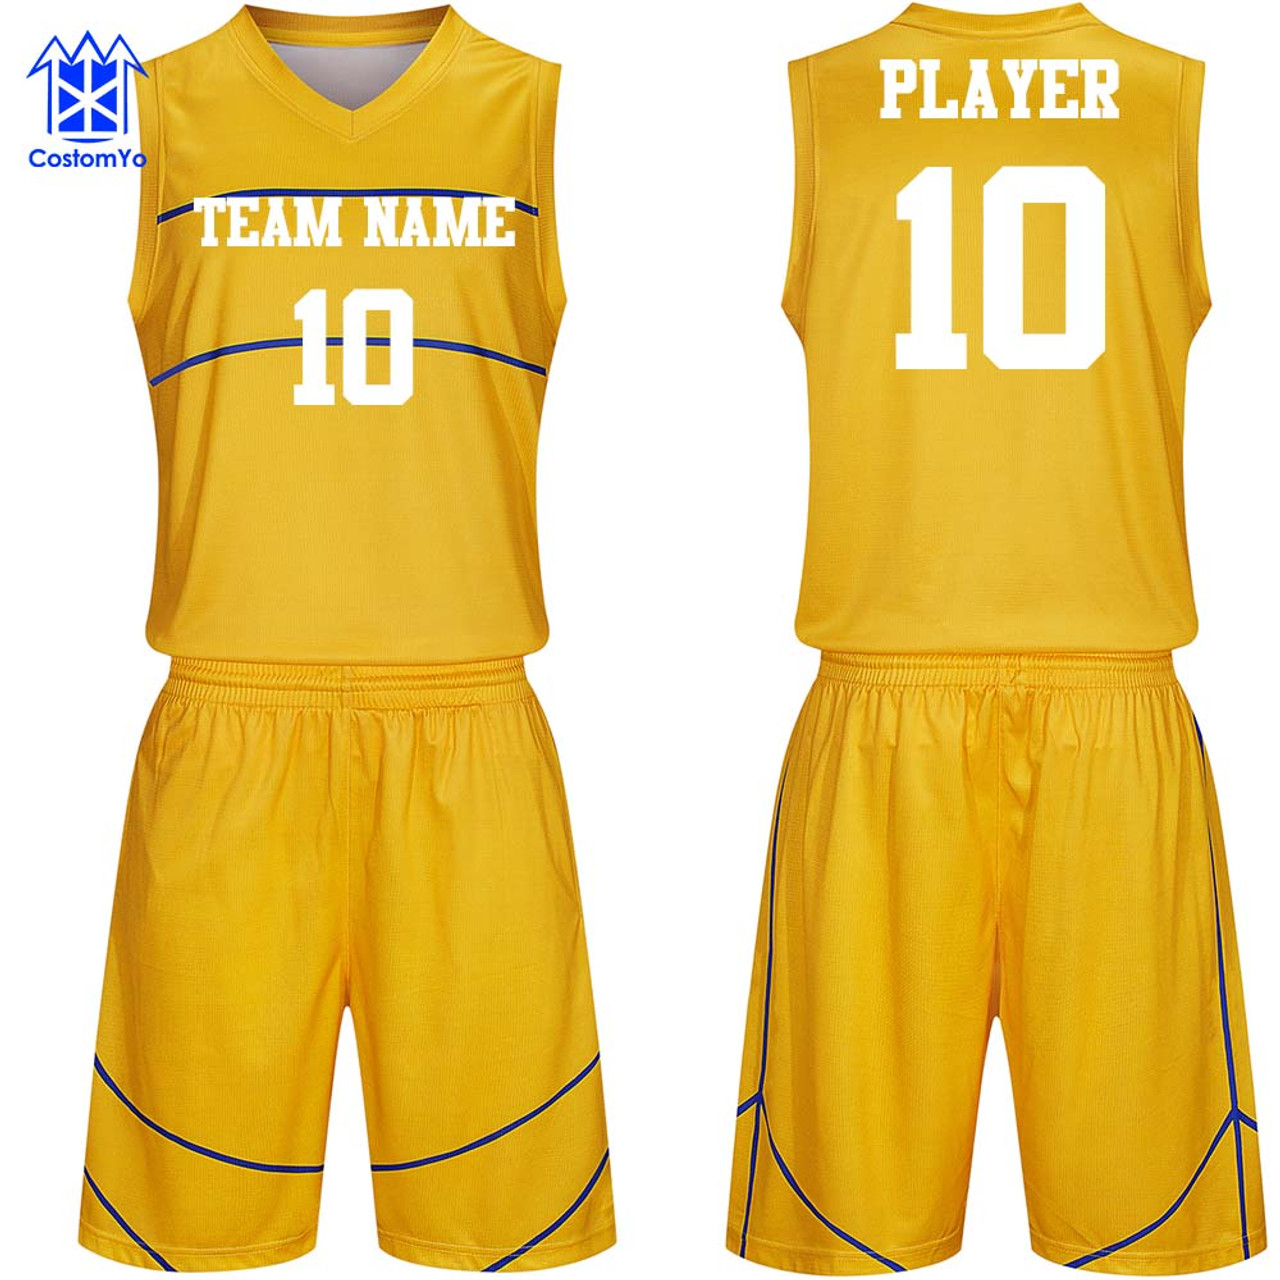 Basketball Shorts 167 - Customize with Free Numbers, Names & Logos